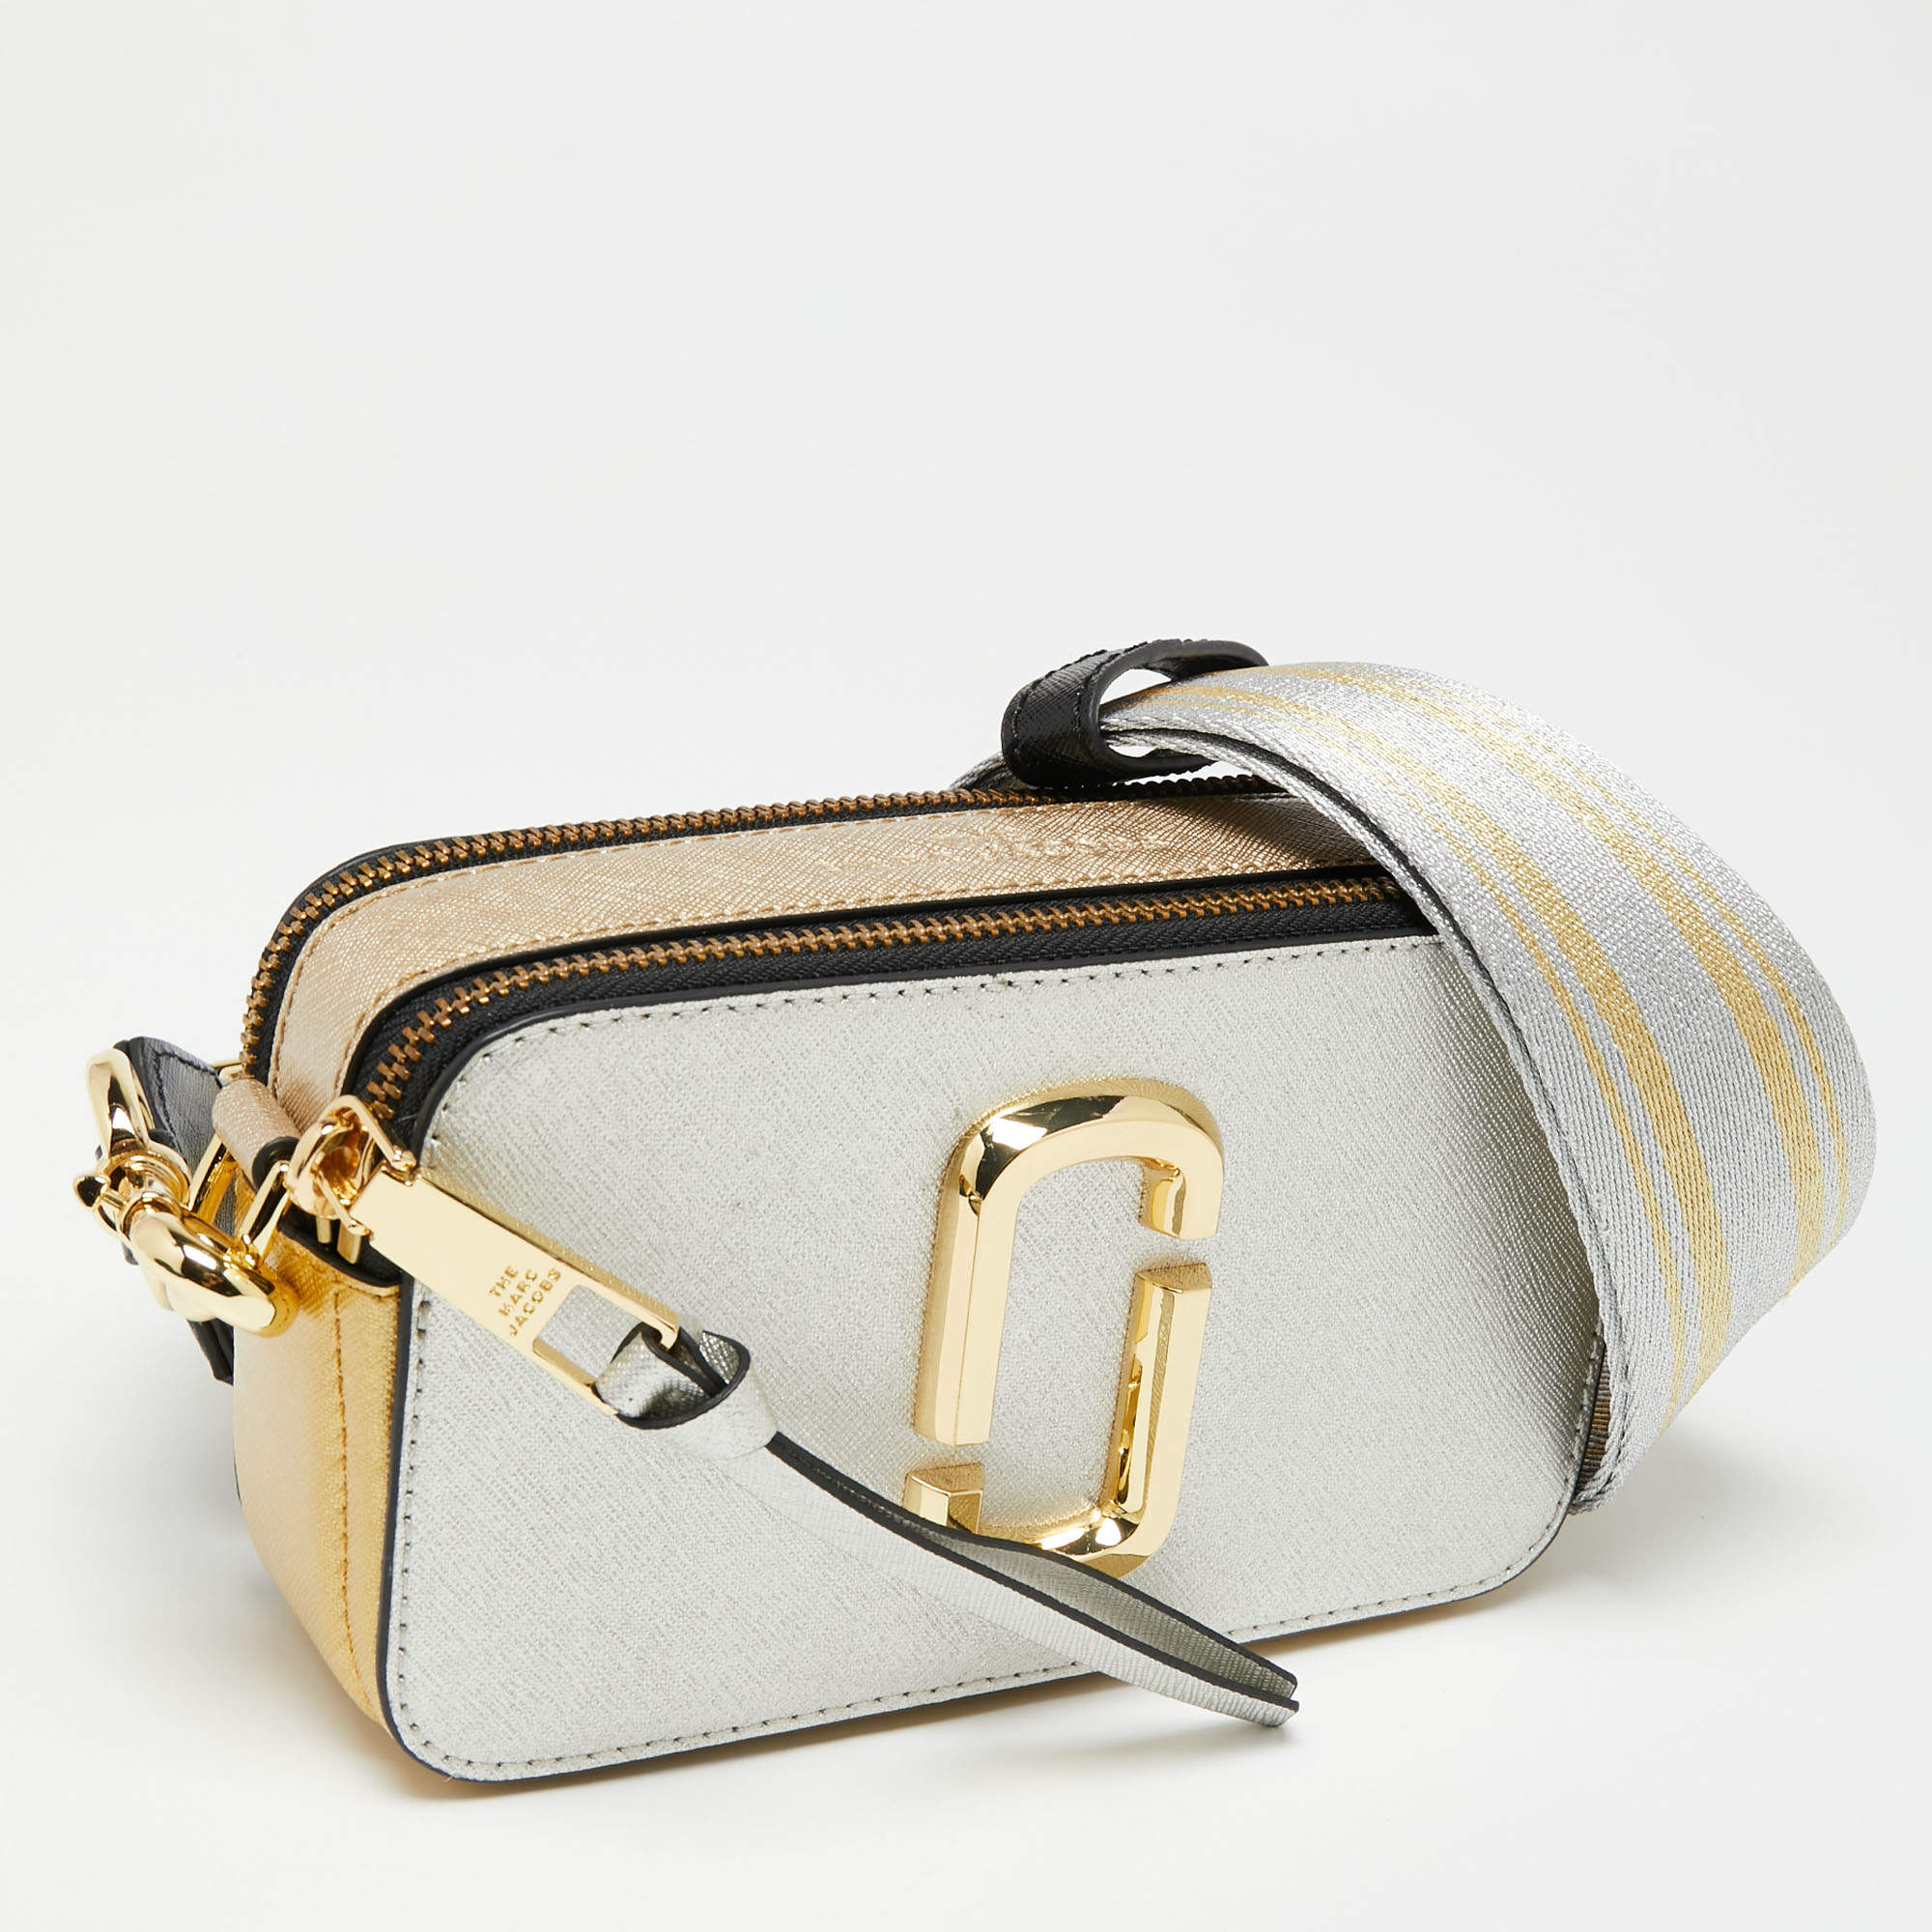 SNAPSHOT LEATHER BAG - MARC JACOBS for WOMEN